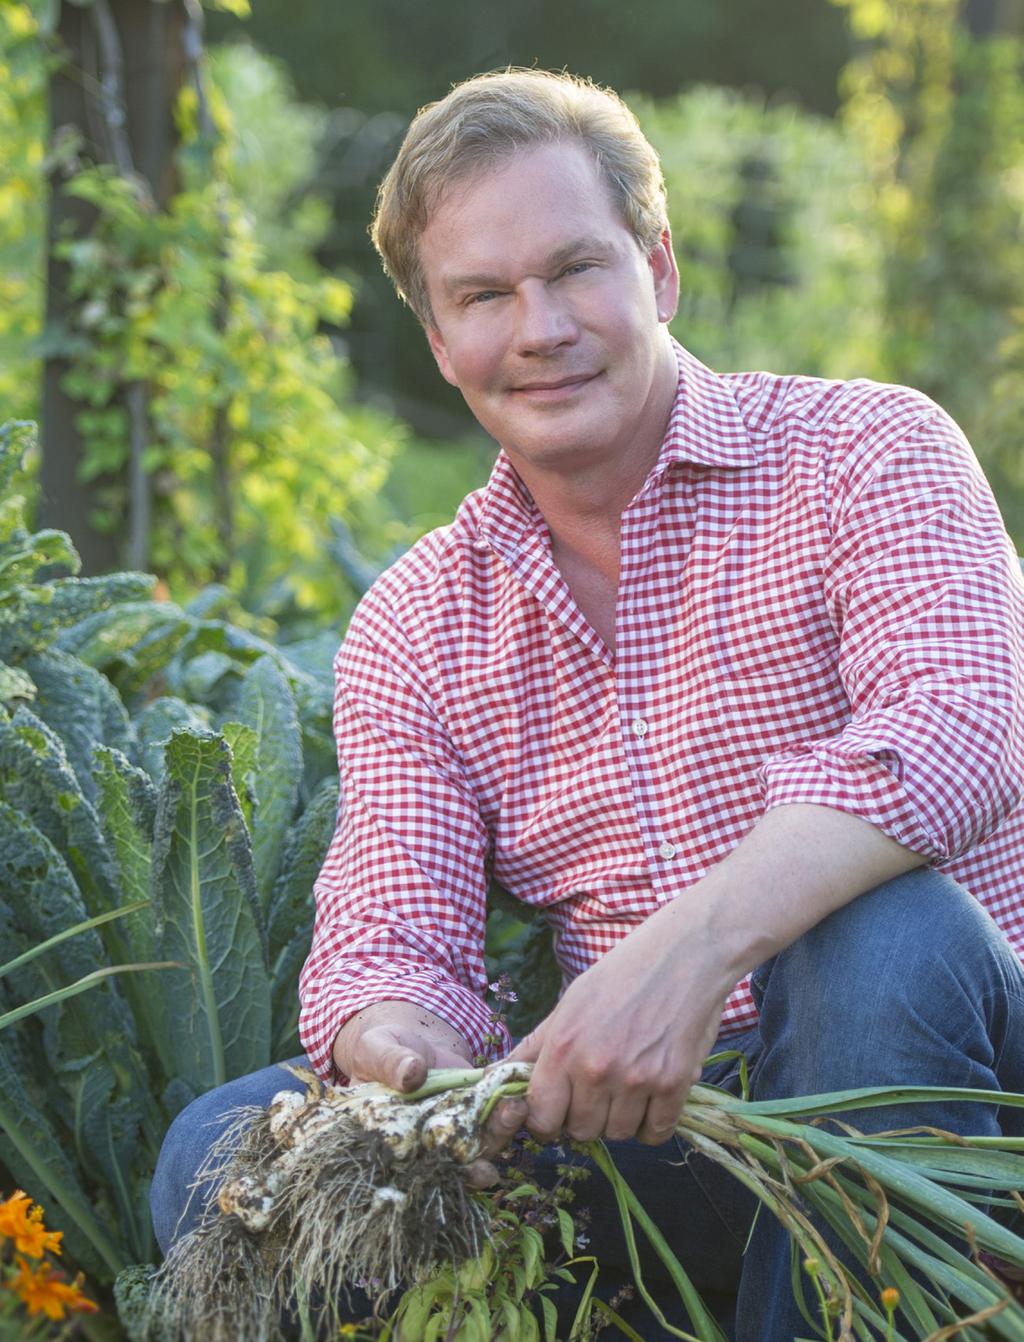 Who is P. Allen Smith? P. Allen Smith is an award-winning designer, gardening and lifestyle expert. He is the host of two public television programs, P. Allen Smith s Garden Home, P.